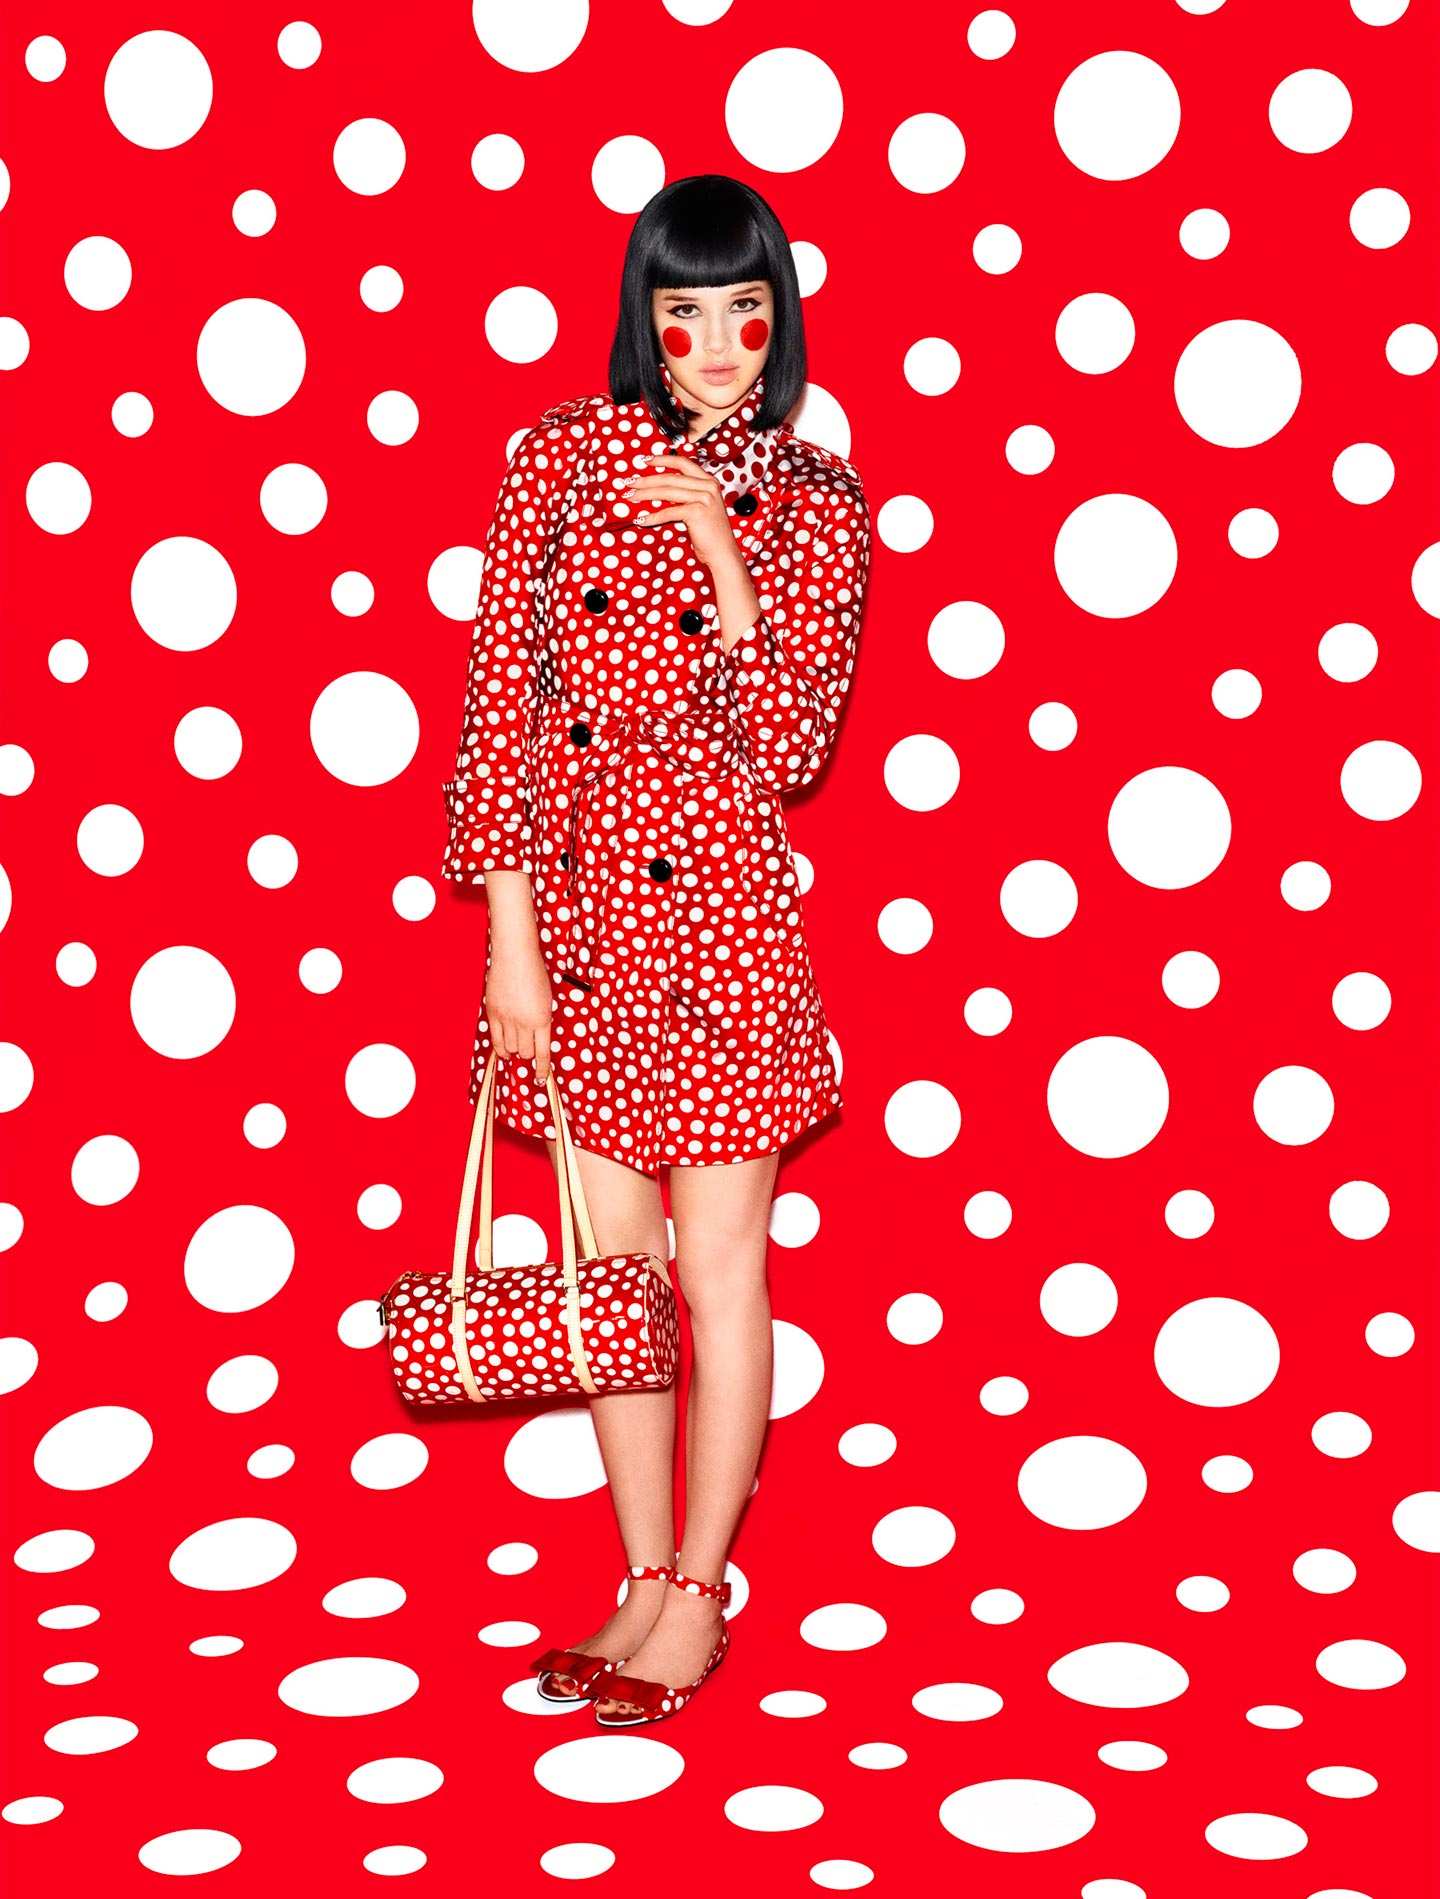 Yayoi Kusama's Whitney Museum Exhibition and Louis Vuitton Collection